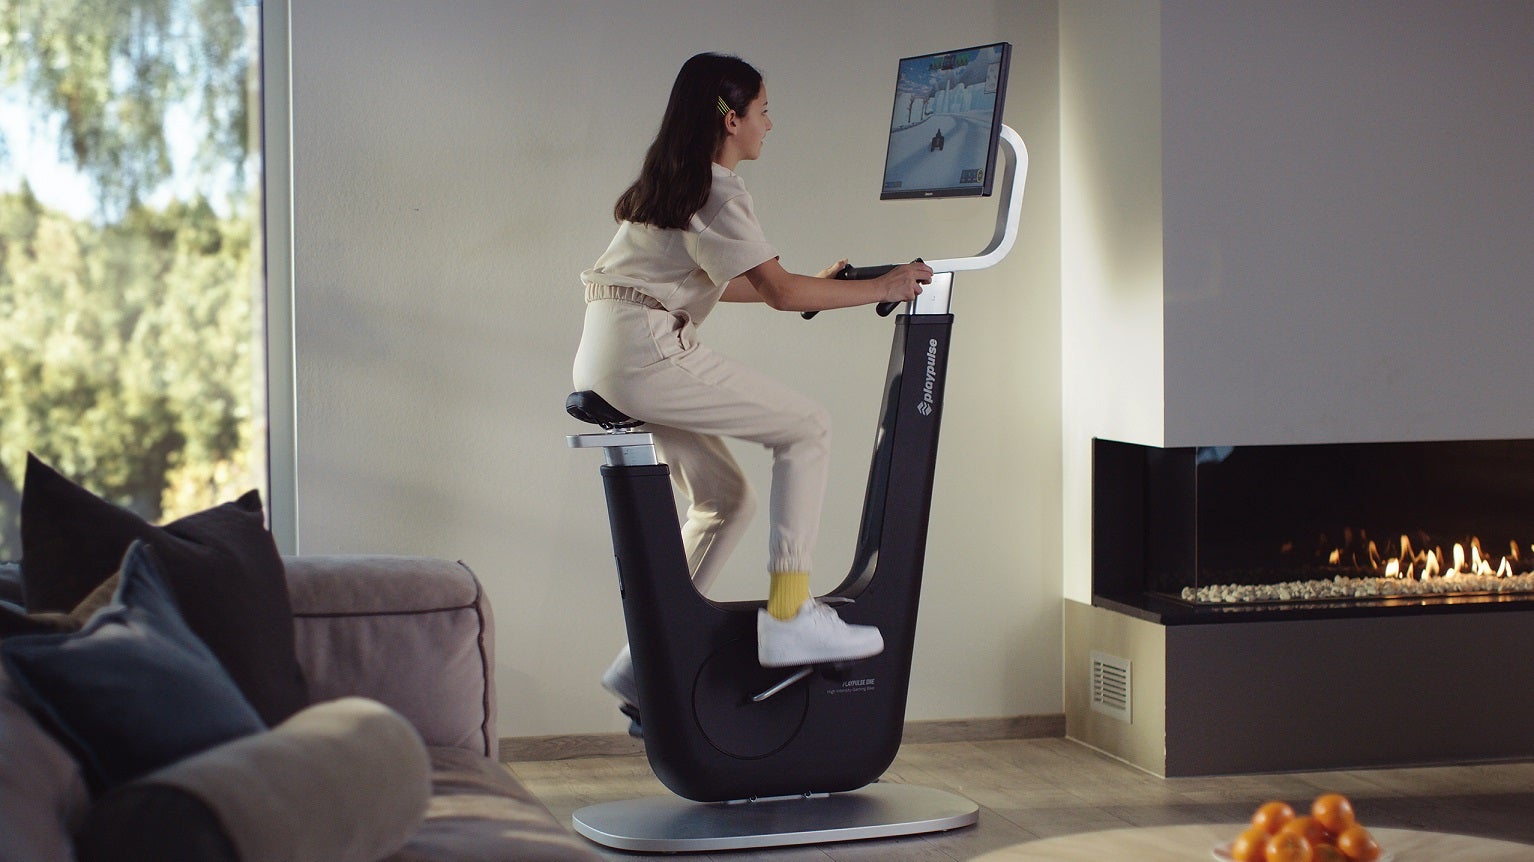 A girl rides on a PlayPulse bike while playing a game on its built-in screen